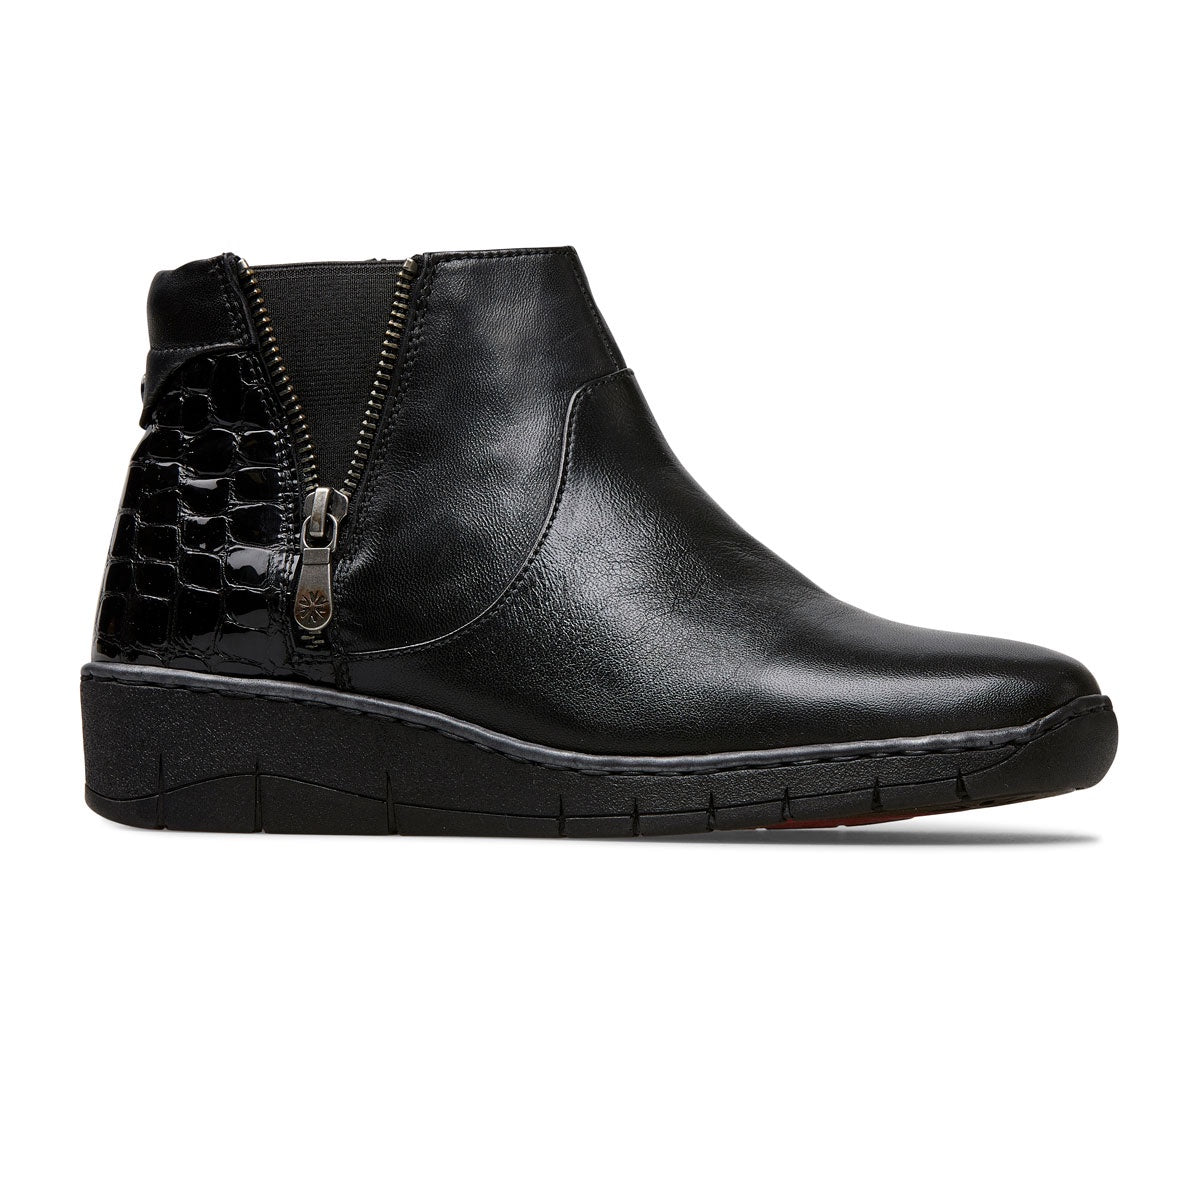 Van Dal Guthrie Black Patent Leather Croc Wedge Ankle Boots E Fit - elevate your sole